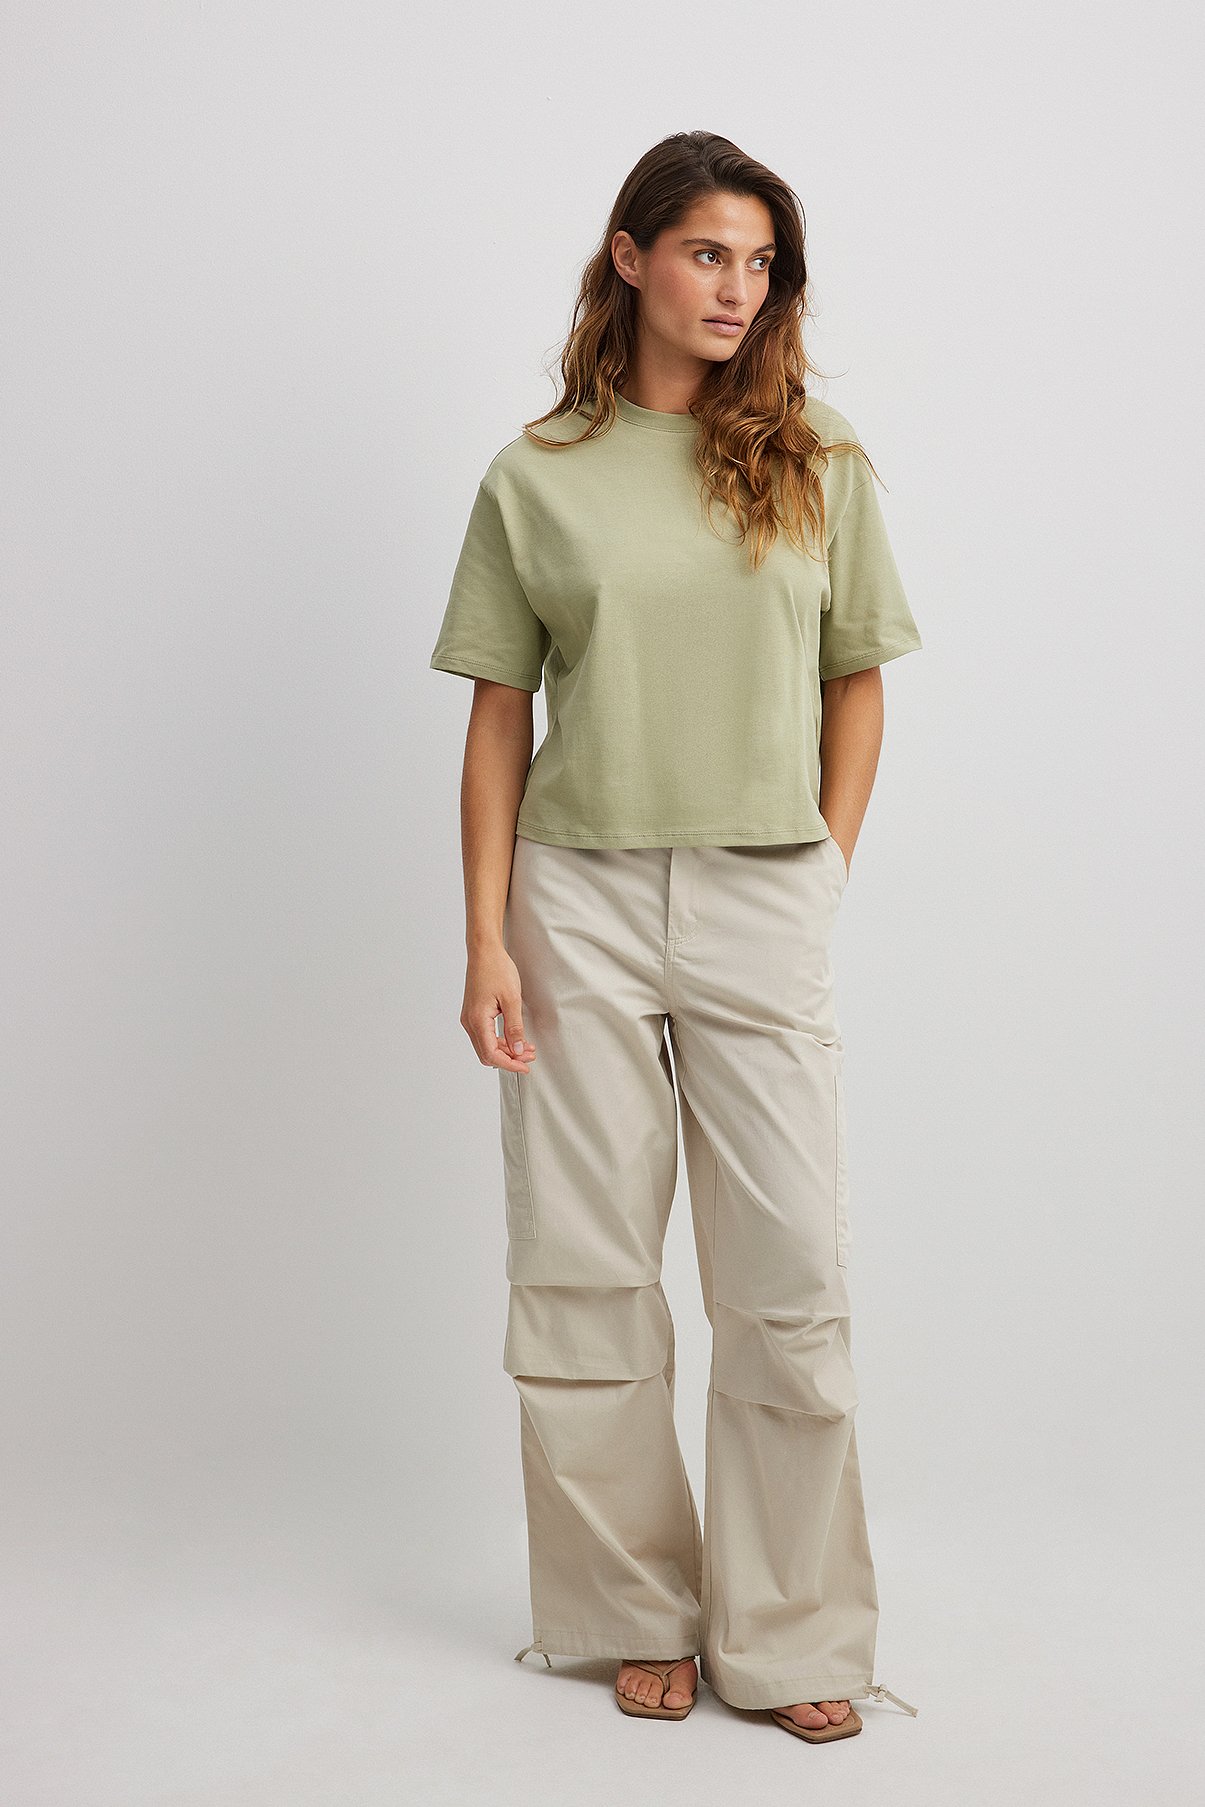 Womens Pants Trendy Women Wide Leg Linen Pants Summer Low Waisted  Drawstring Elastic Casual Comfy Cotton Cargo Trousers with Pockets Below 5  Dollars Items Sales Today at Amazon Women's Clothing store